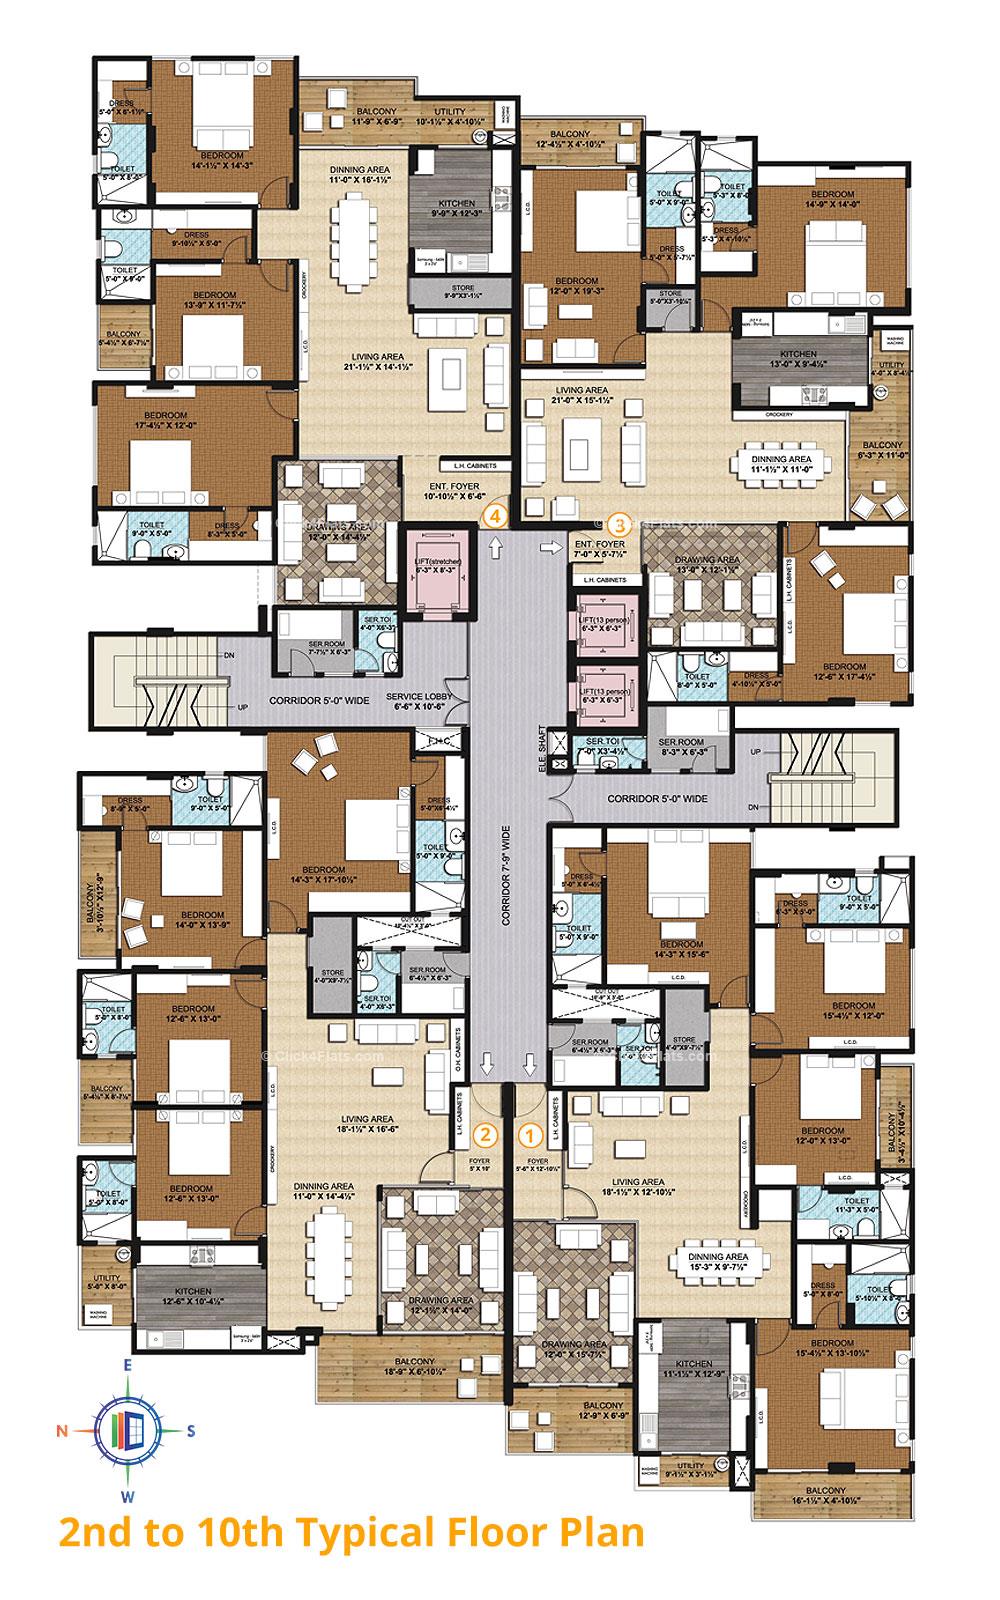 The Park Central Typical Floor Plan